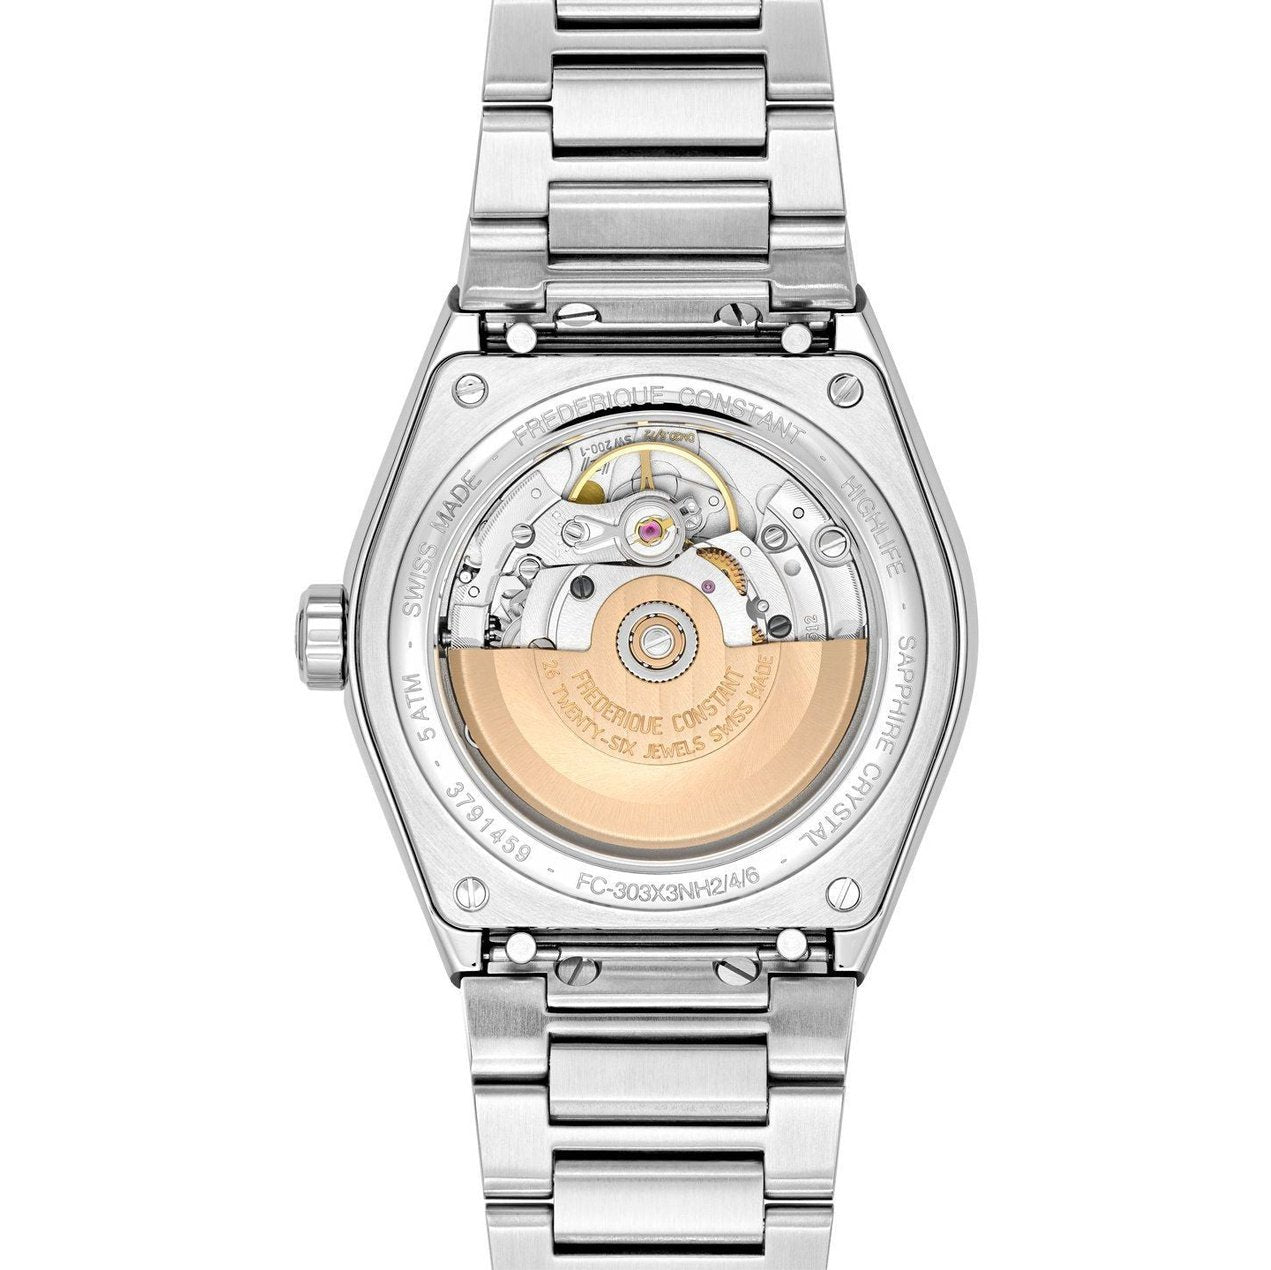 Ladies Highlife Watch FC-303S3NH6B Frederique Constant